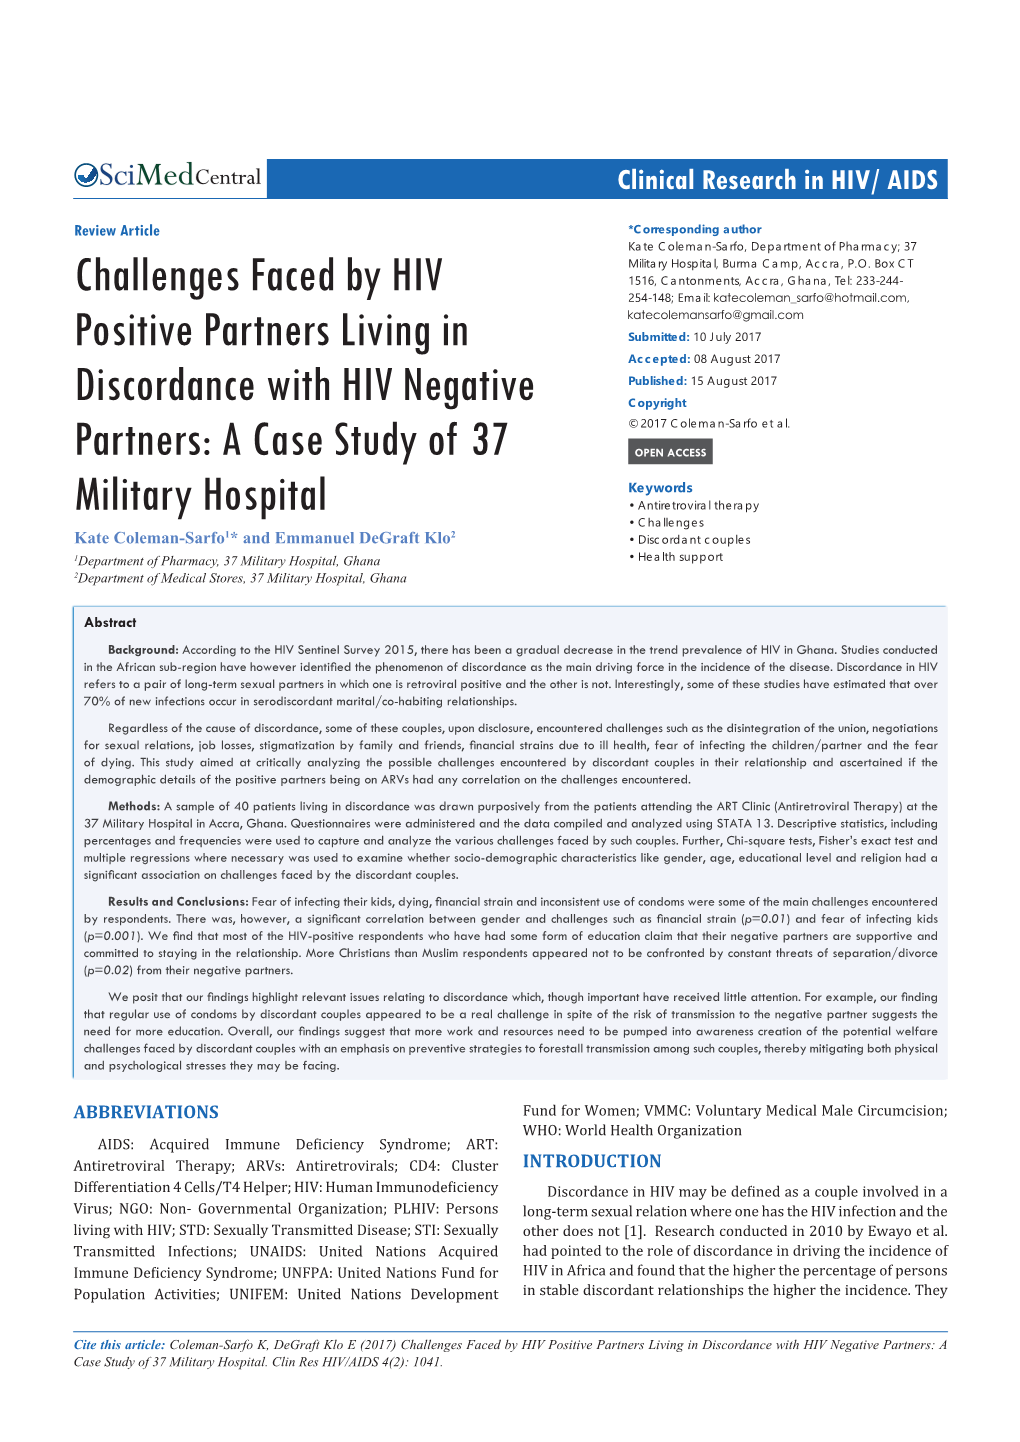 Challenges Faced by HIV Positive Partners Living in Discordance with HIV Negative Partners: a Case Study of 37 Military Hospital